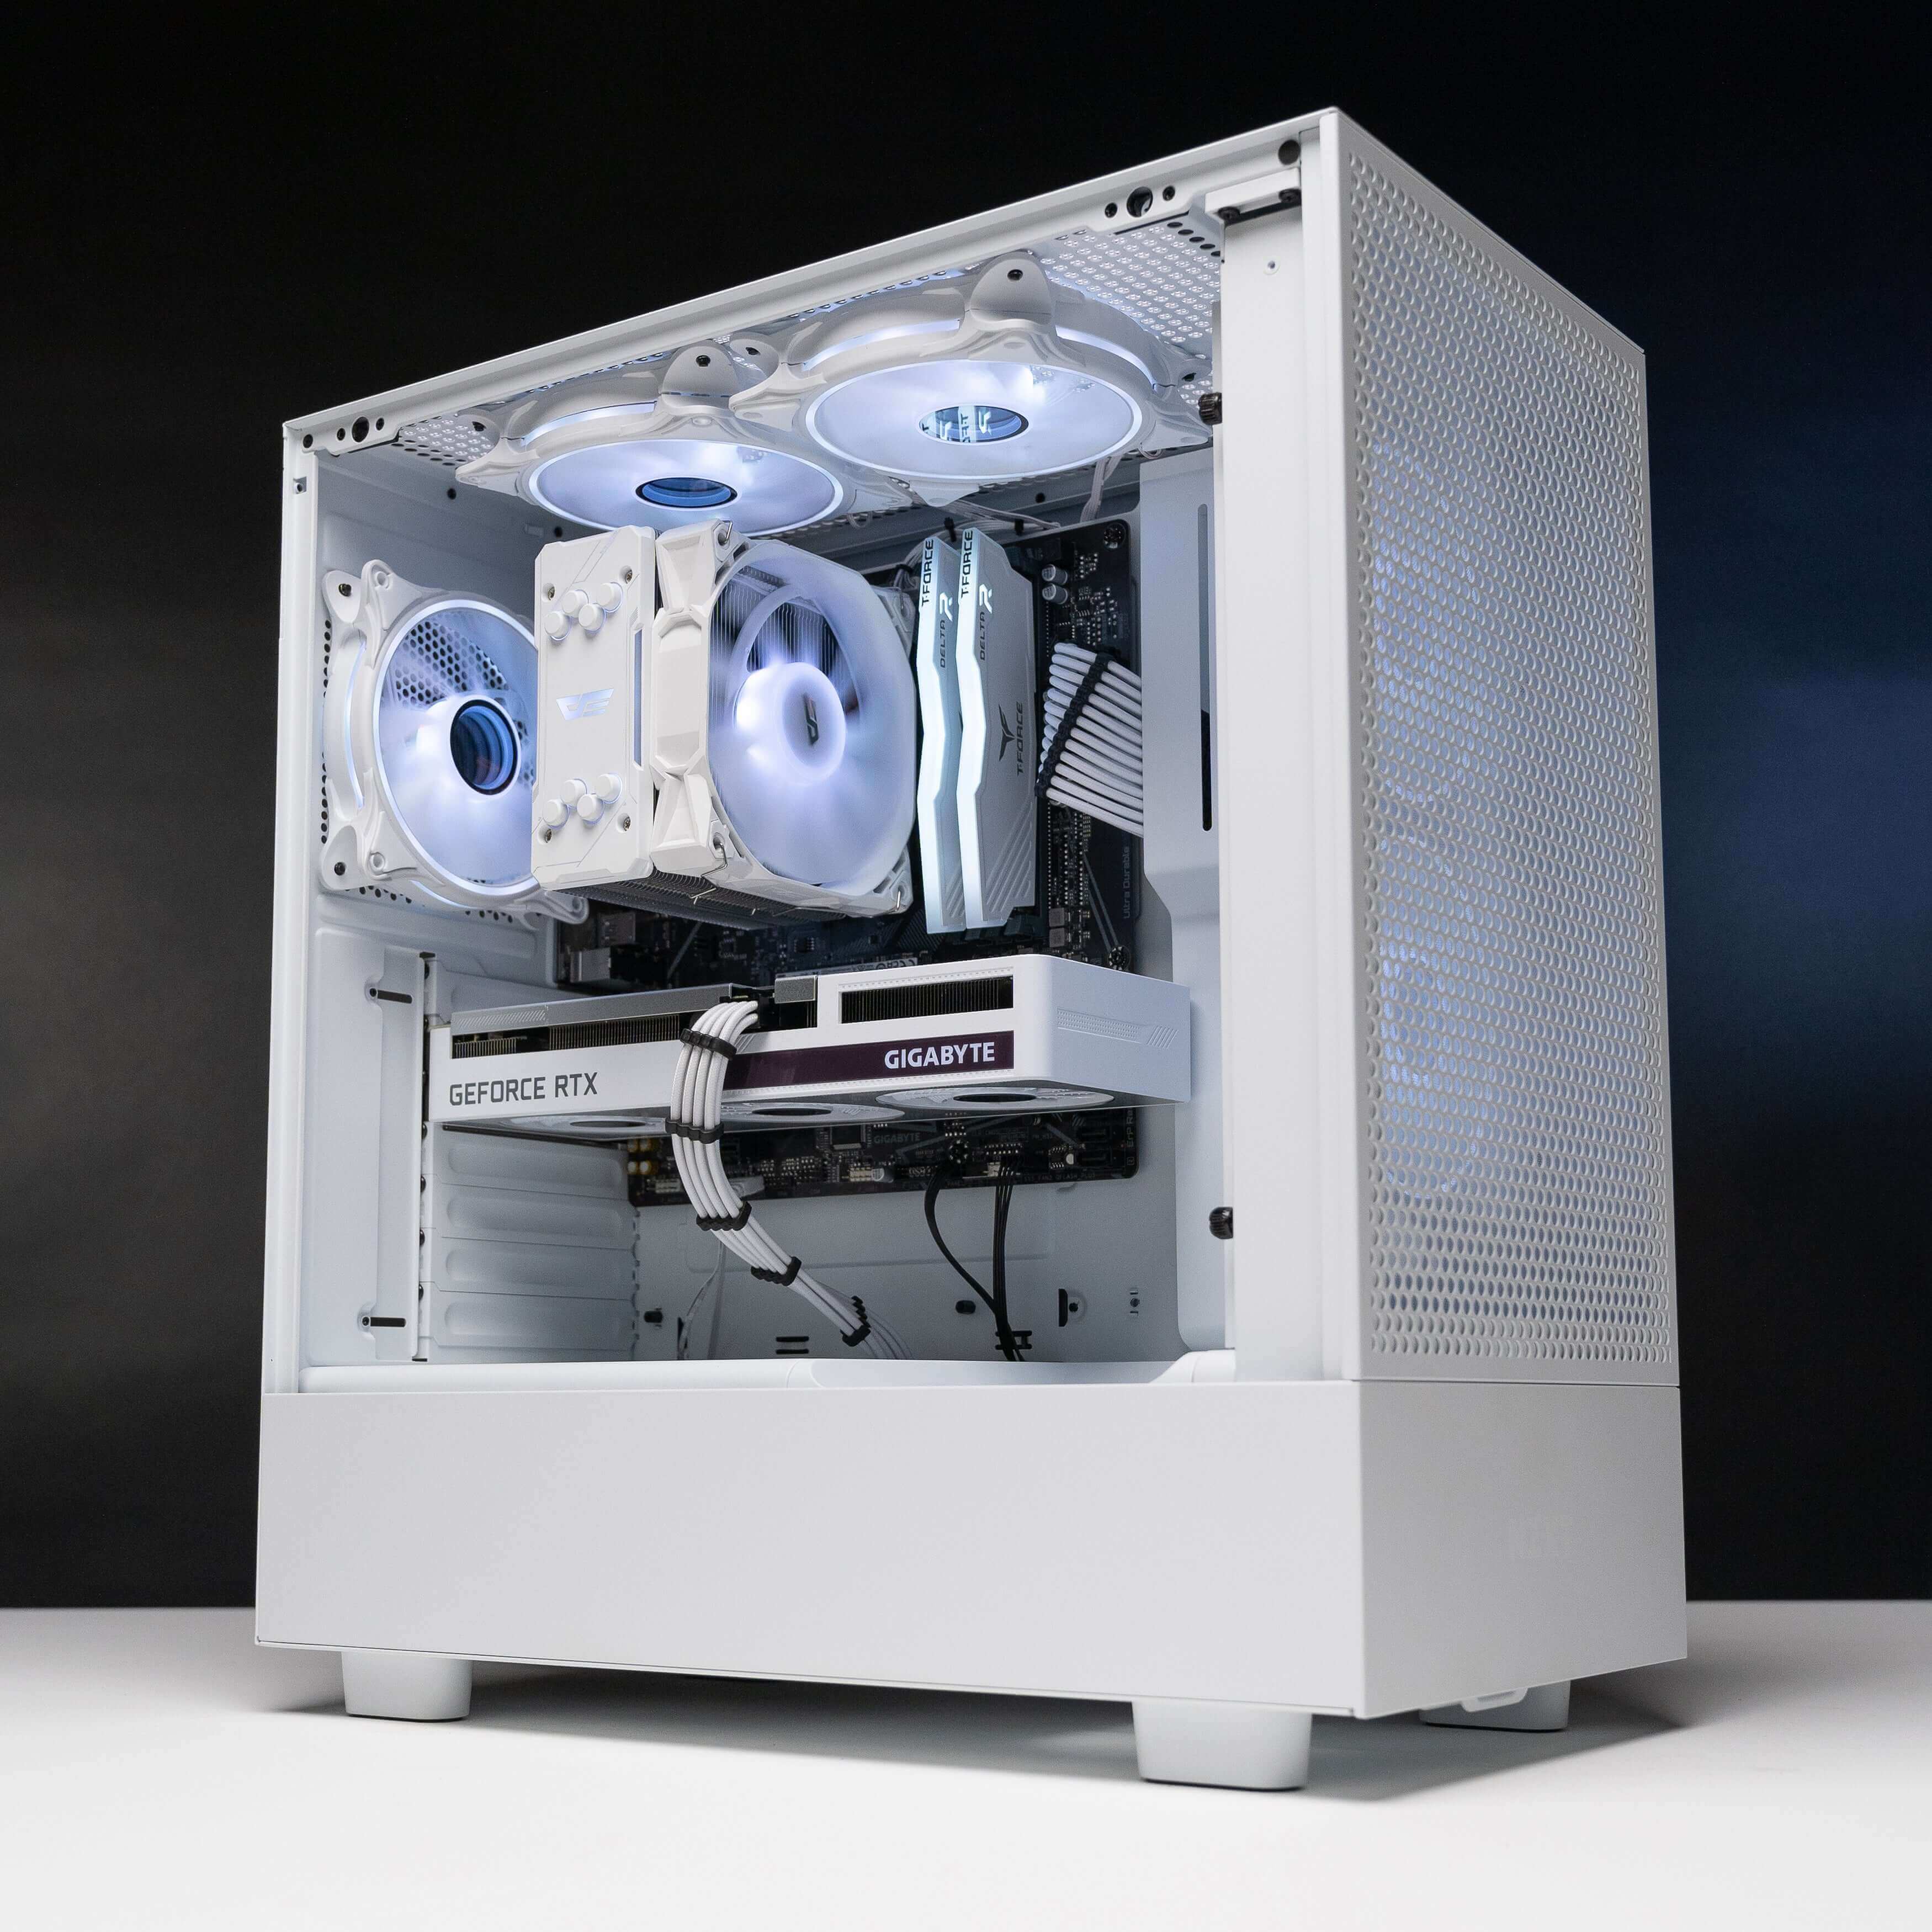 NZXT: LVL 6 PC features GeForce RTX 3060 OC 12GB graphics card for incredible gaming visuals.